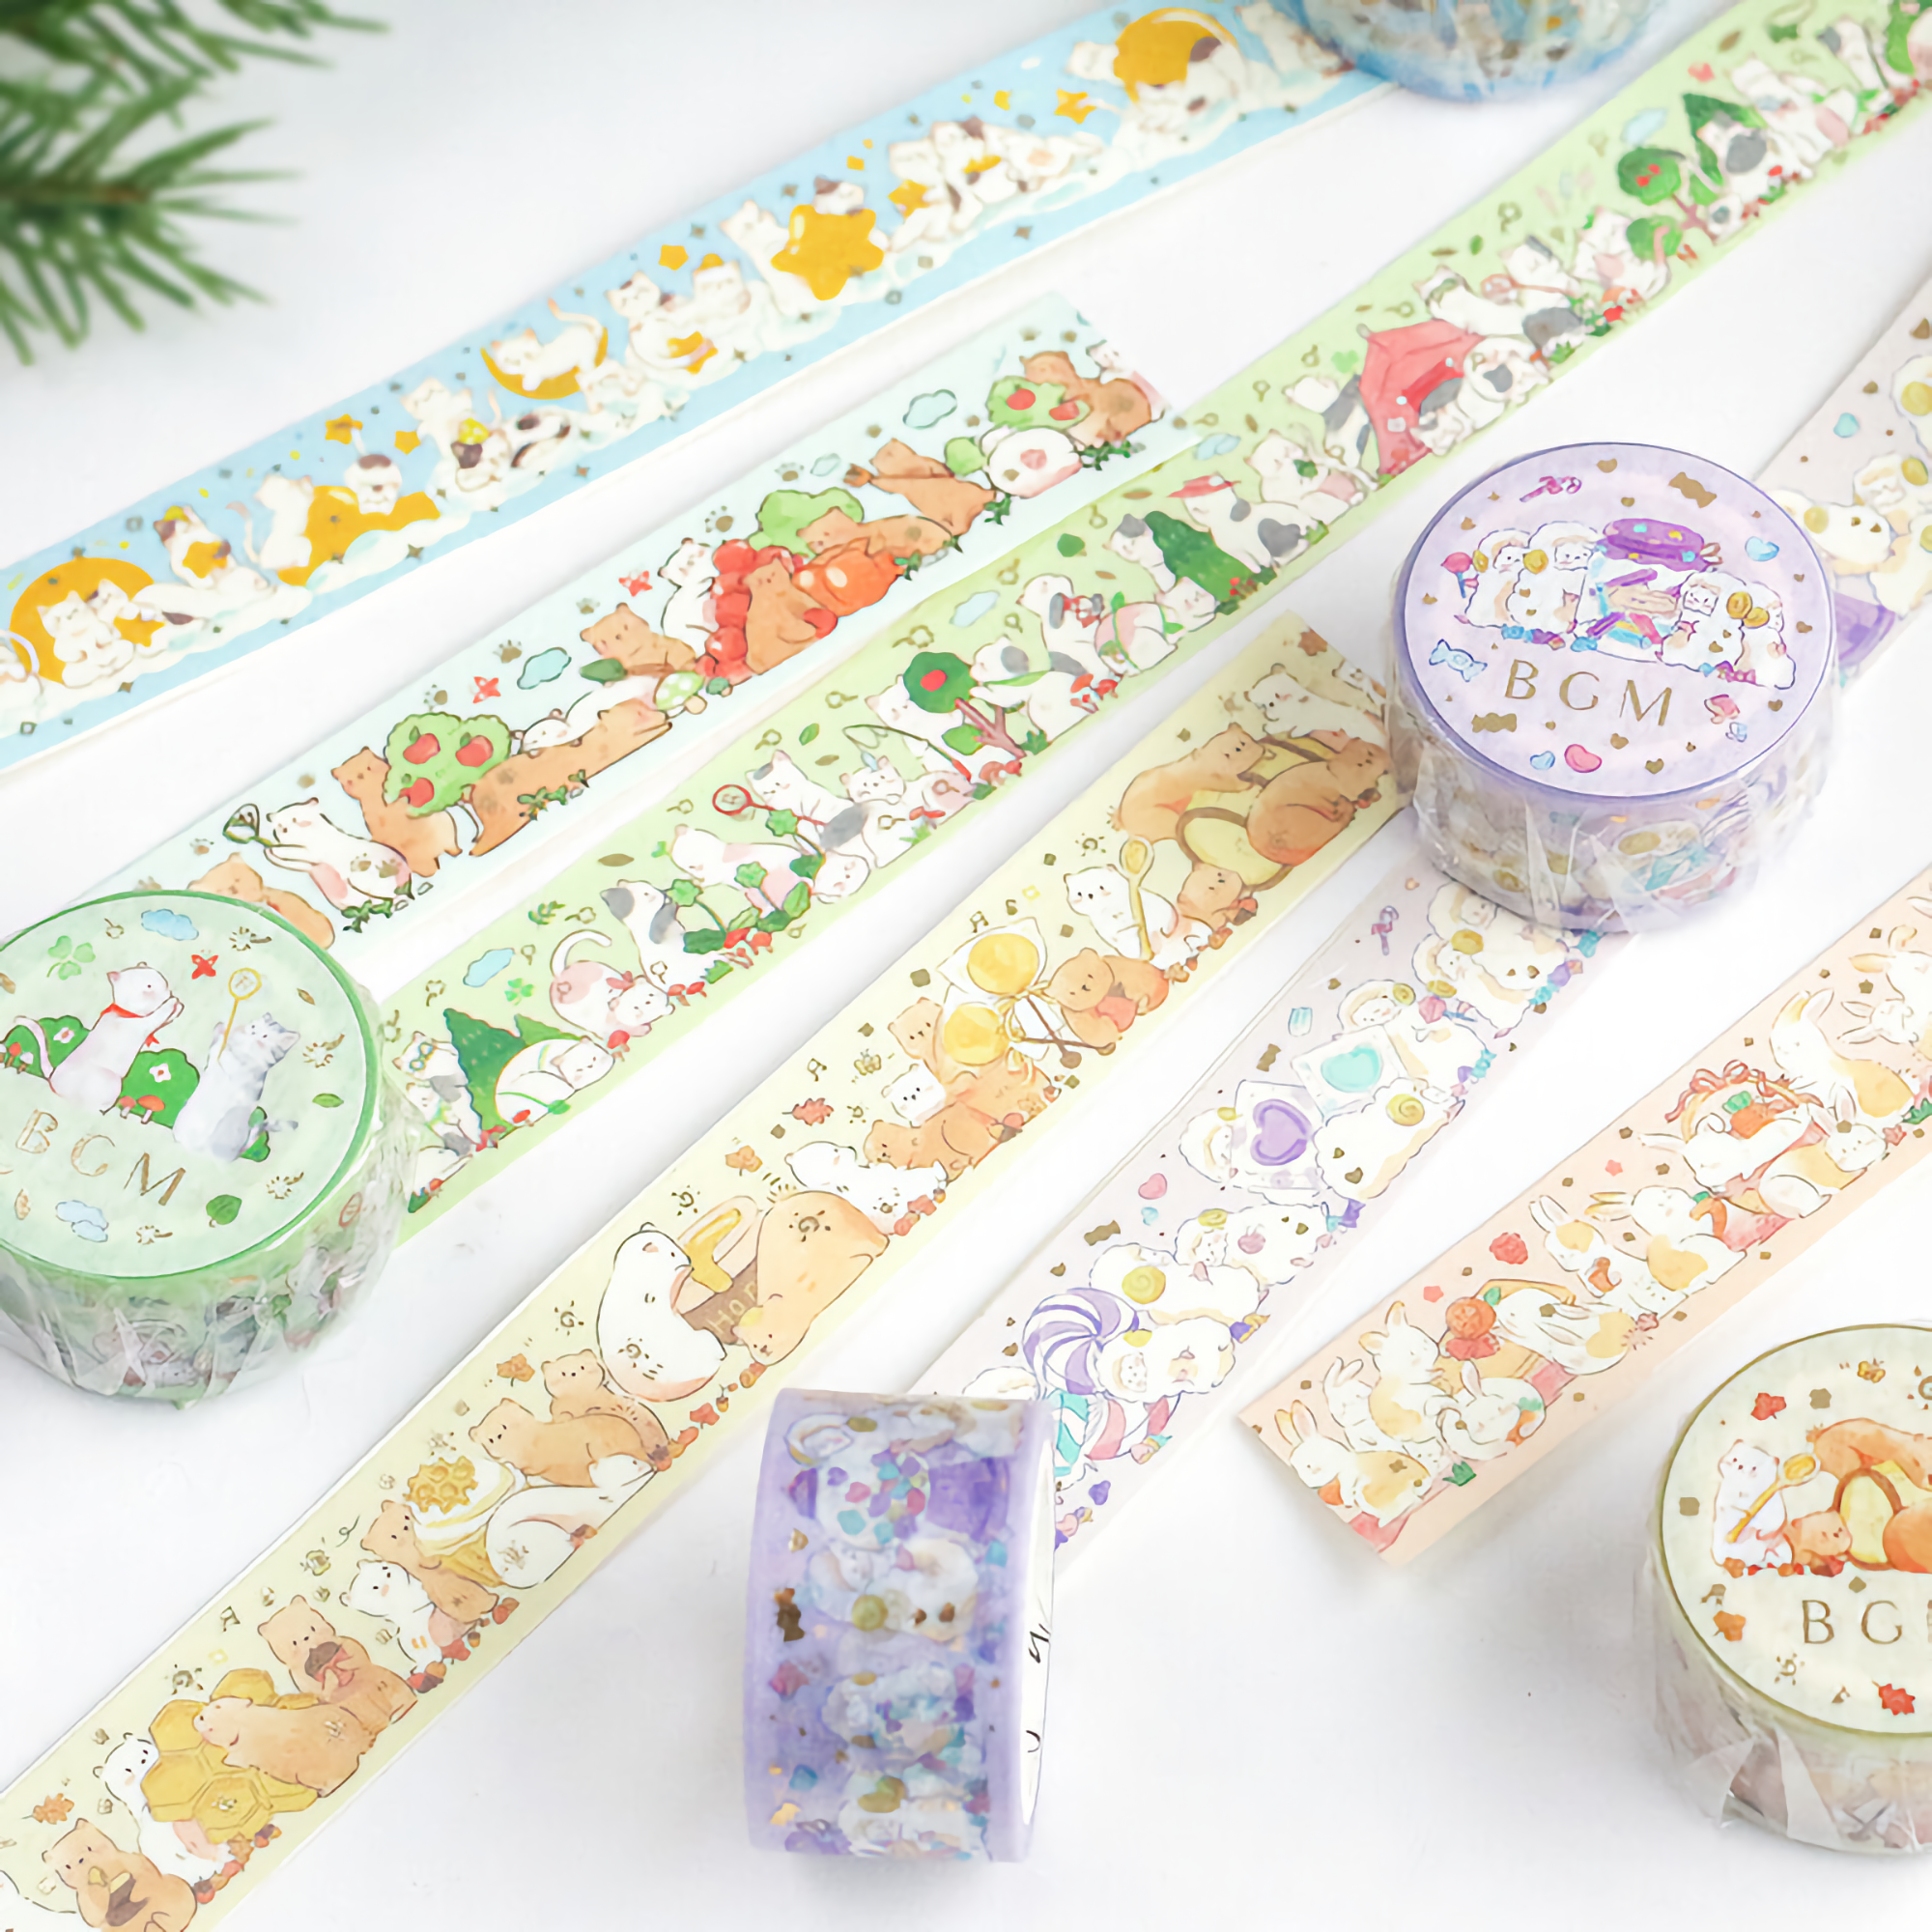 BGM Washi Tape Special Foil Animal Party Honey 20 mm